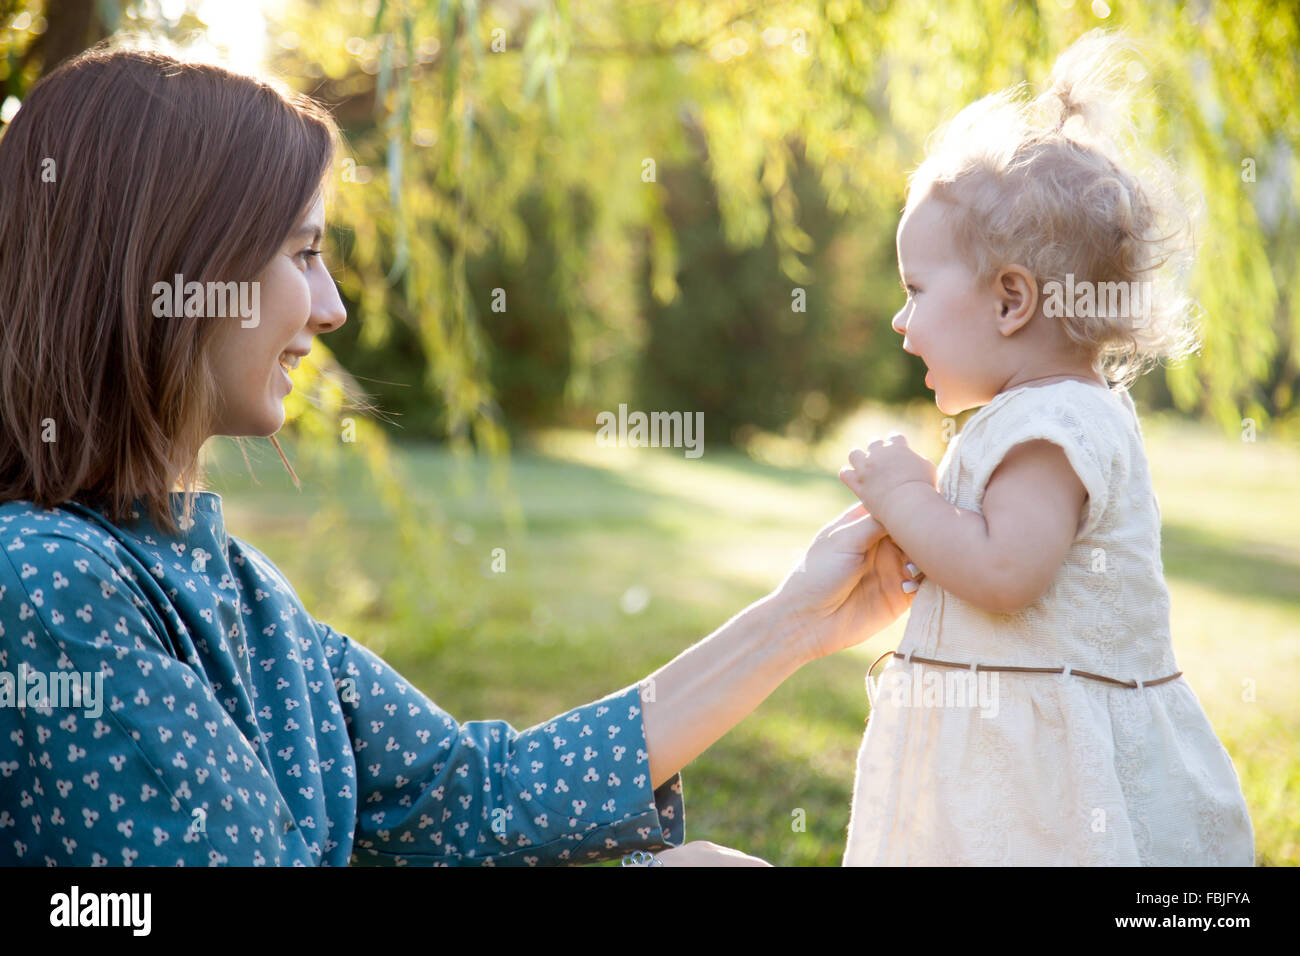 Happy young mom and adorable blond girl playing together in park in summertime, smiling mother holding her little daughter hand, Stock Photo